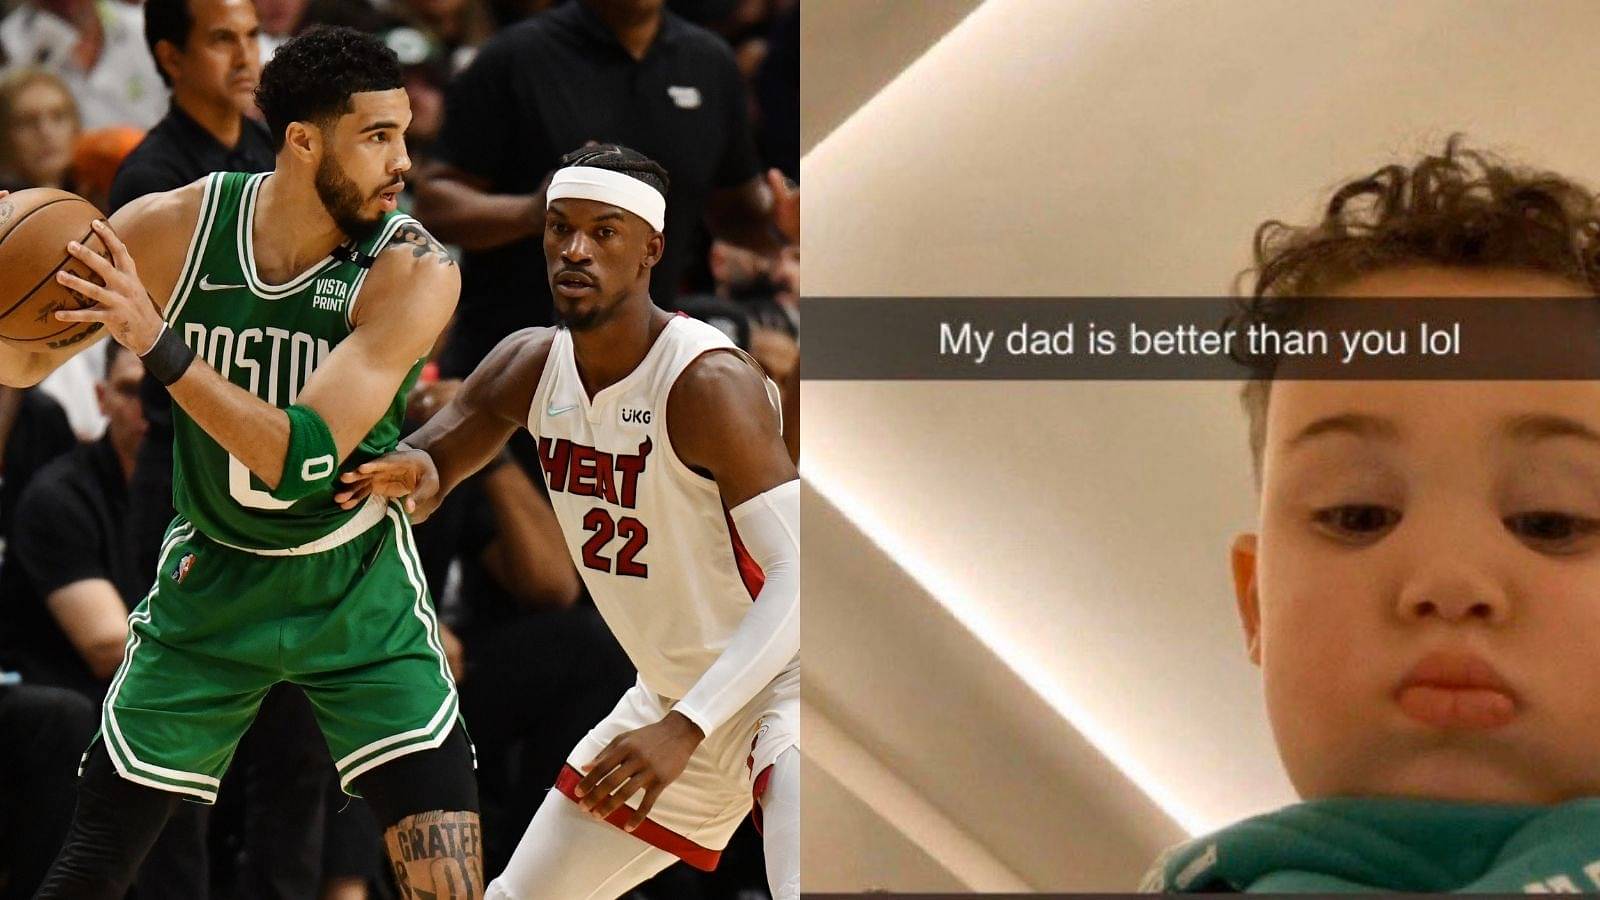 "My dad is better than you Jimmy Butler": NBA Twitter comes out with hilarious reactions featuring Deuce after Jayson Tatum 's amazing Game 2 performance